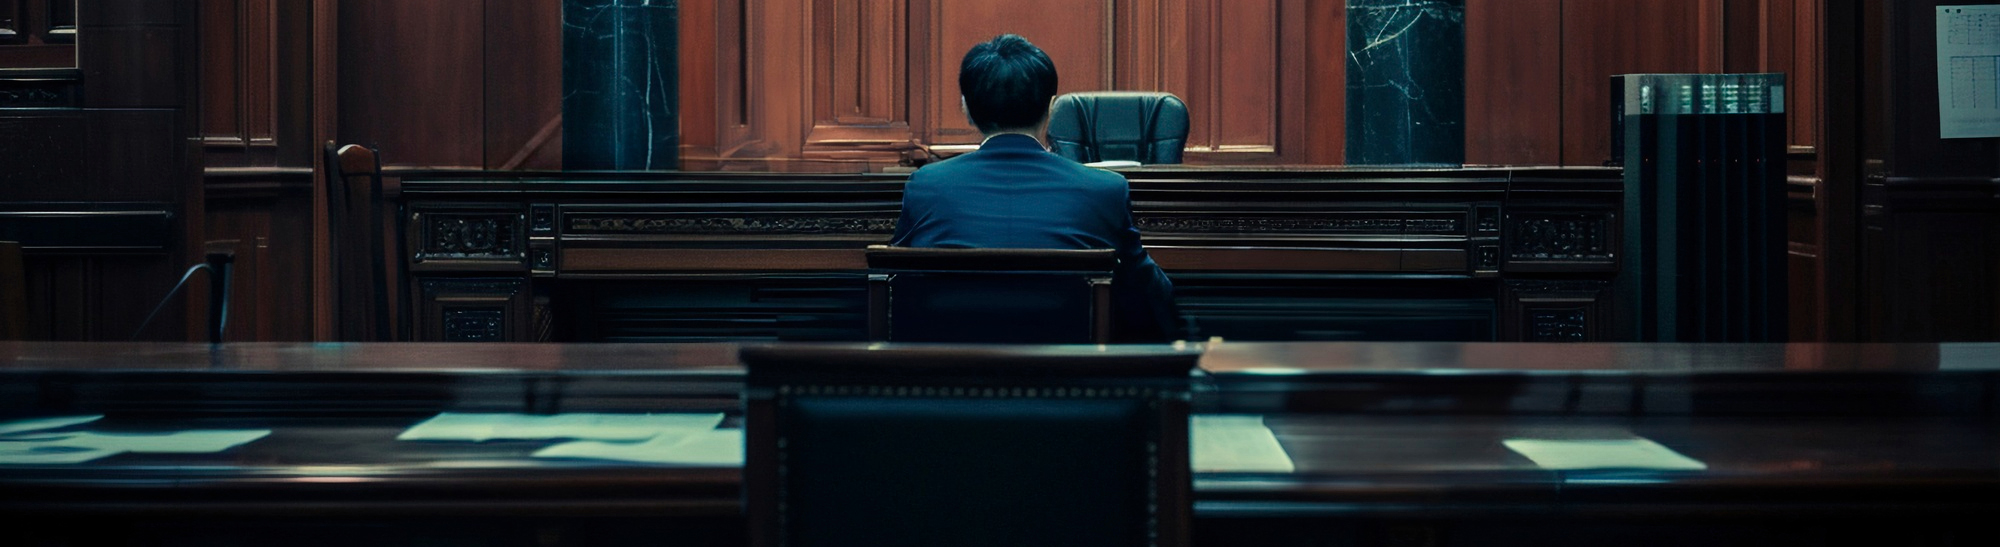 Courtroom with sole occupant